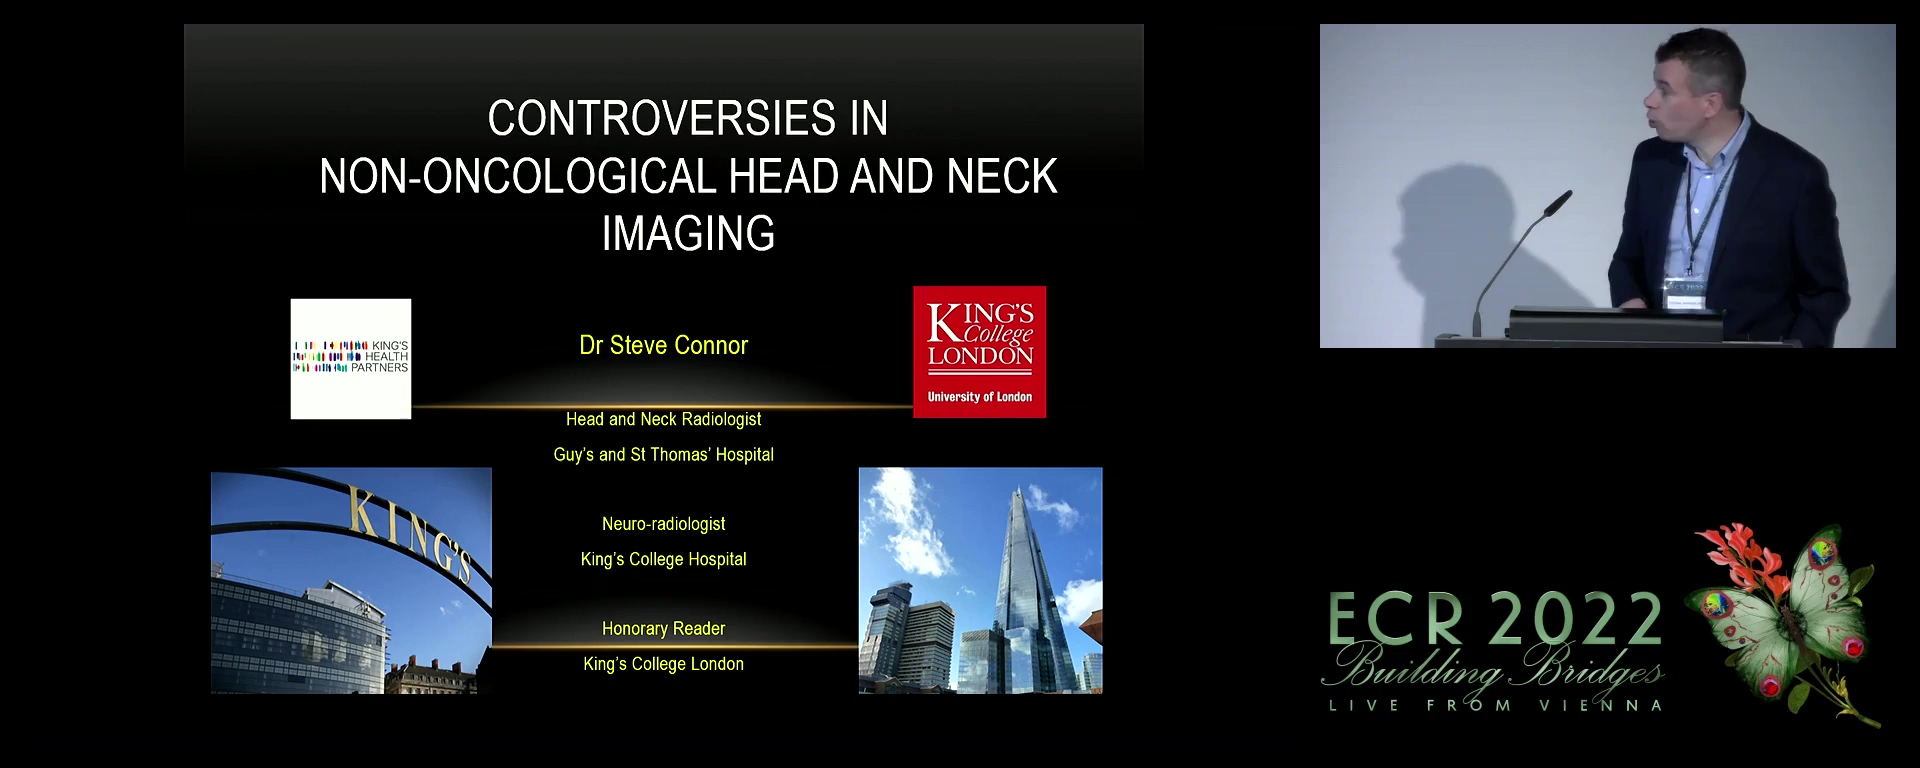 Controversies in non-oncological head and neck imaging